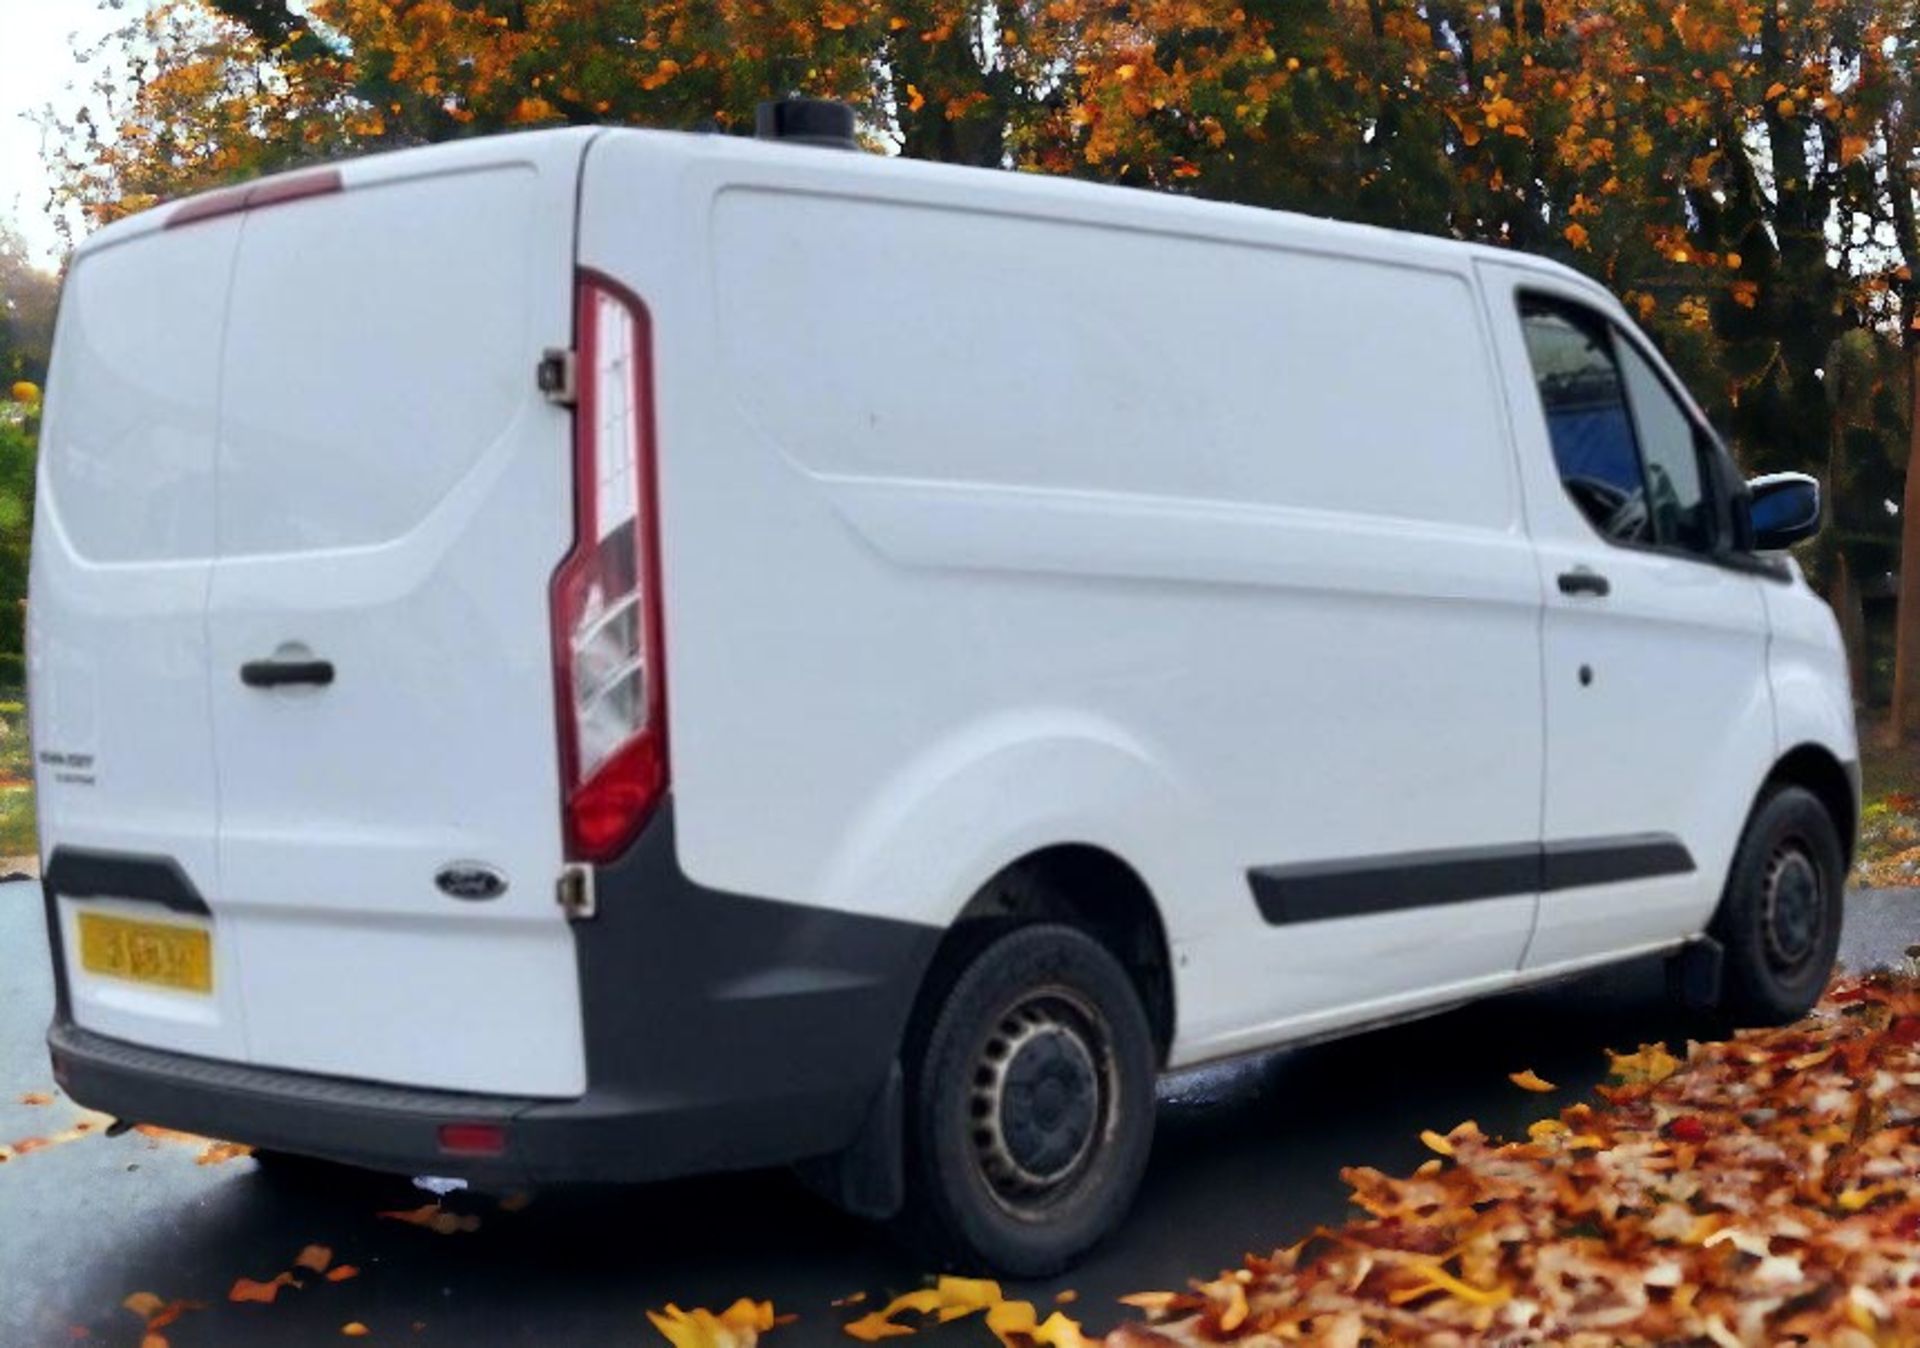 2015 FORD TRANSIT CUSTOM PANEL VAN - RELIABLE AND EFFICIENT WORKHORSE - Image 7 of 17